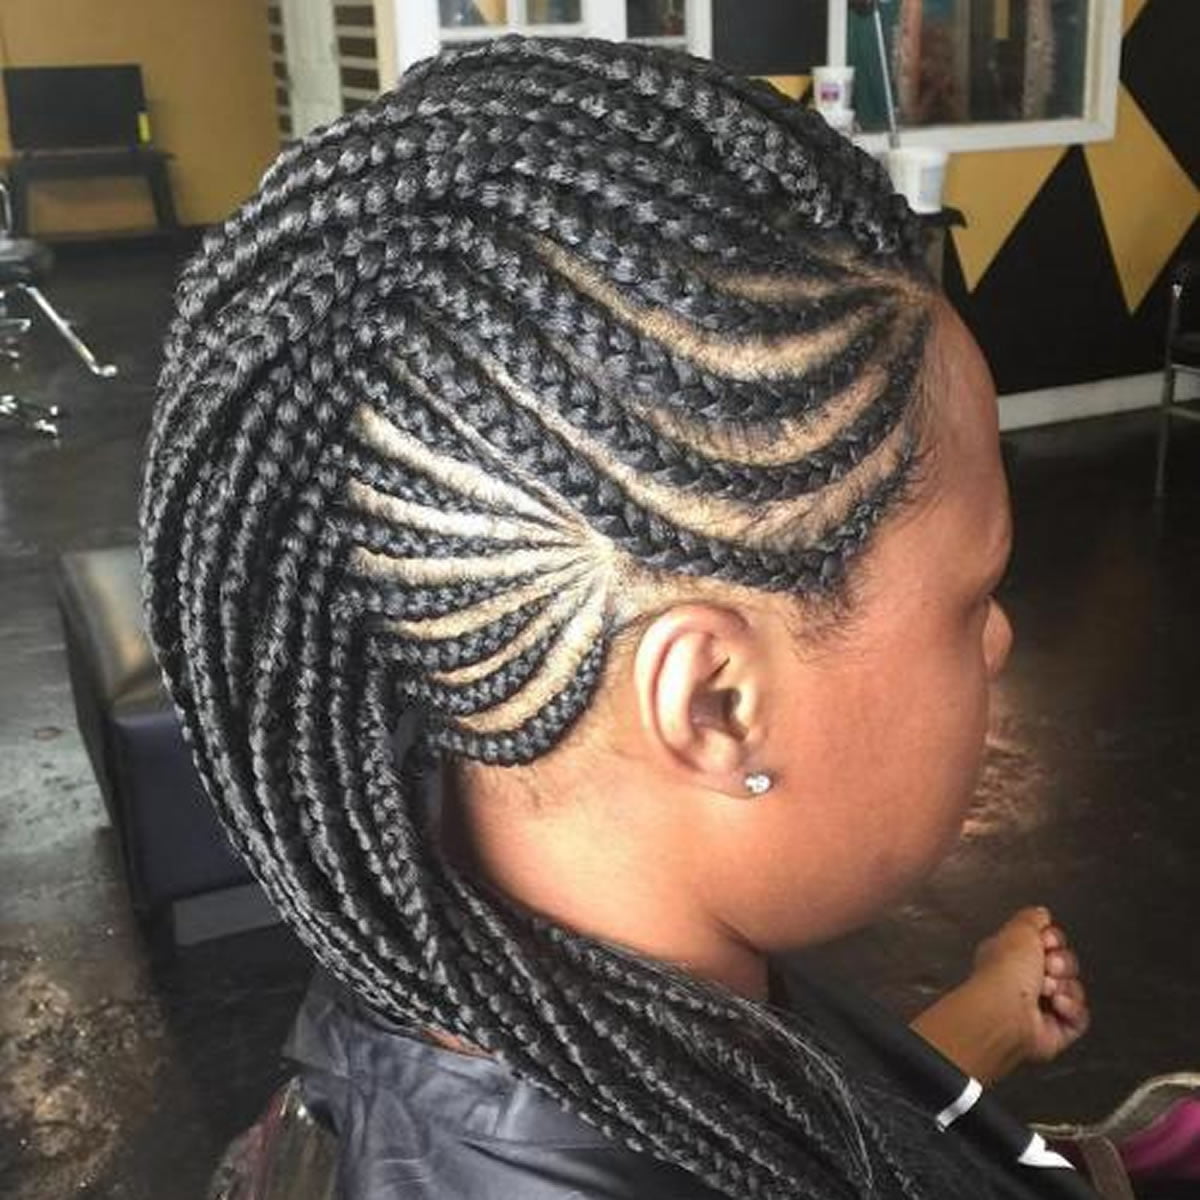 20 Best African American Braided Hairstyles for Women 2020 ...